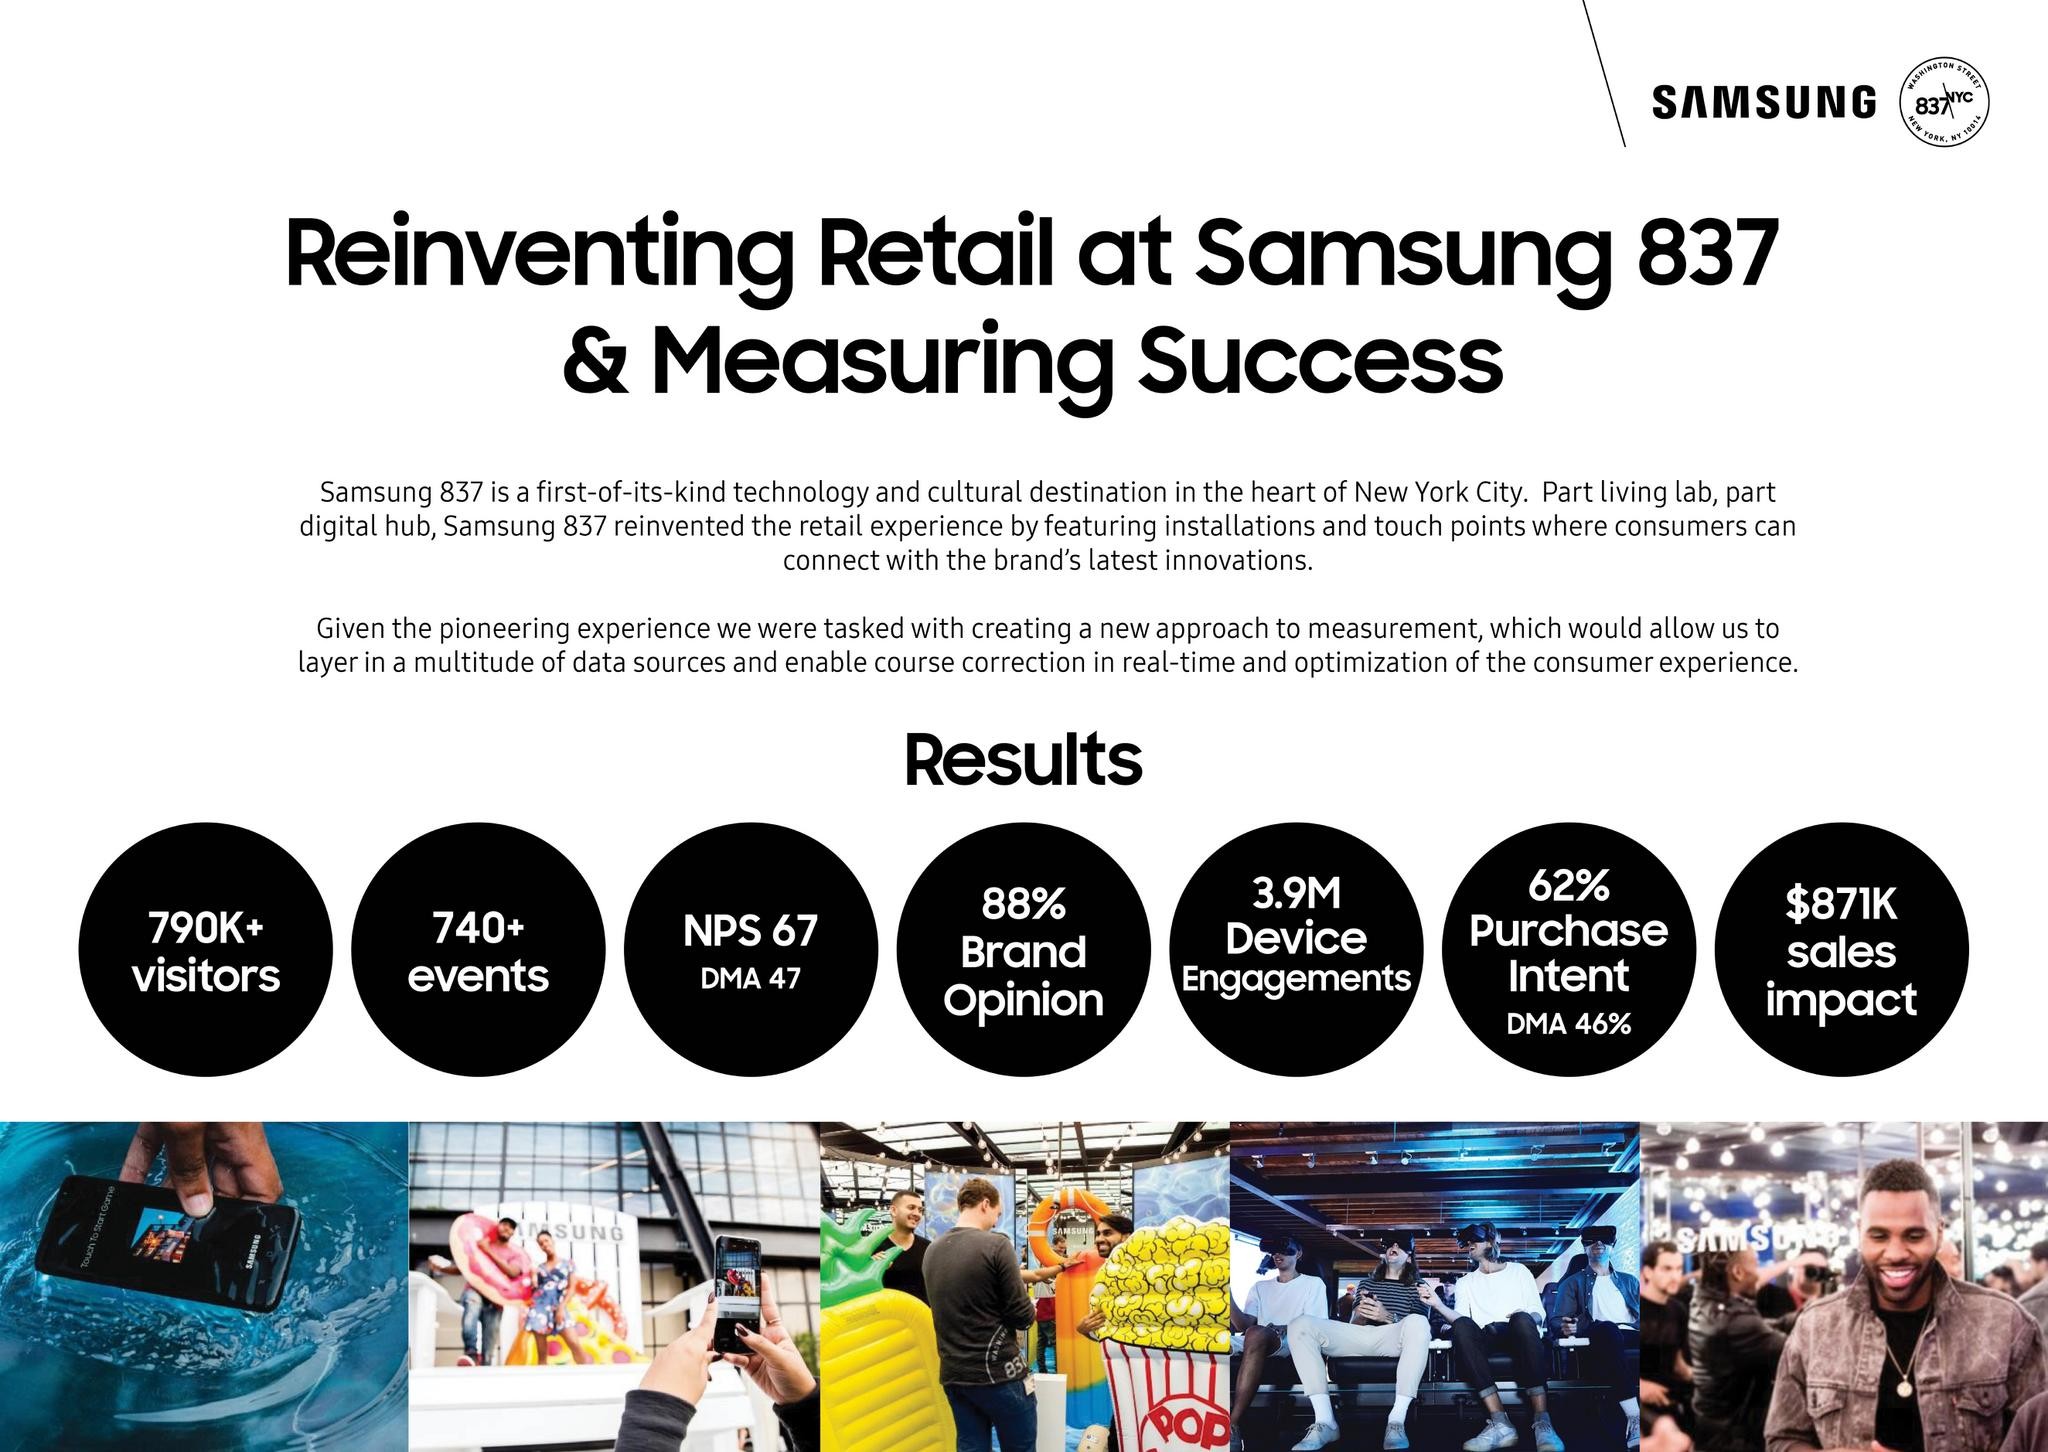 REINVENTING RETAIL AT SAMSUNG 837 AND MEASURING SUCCESS